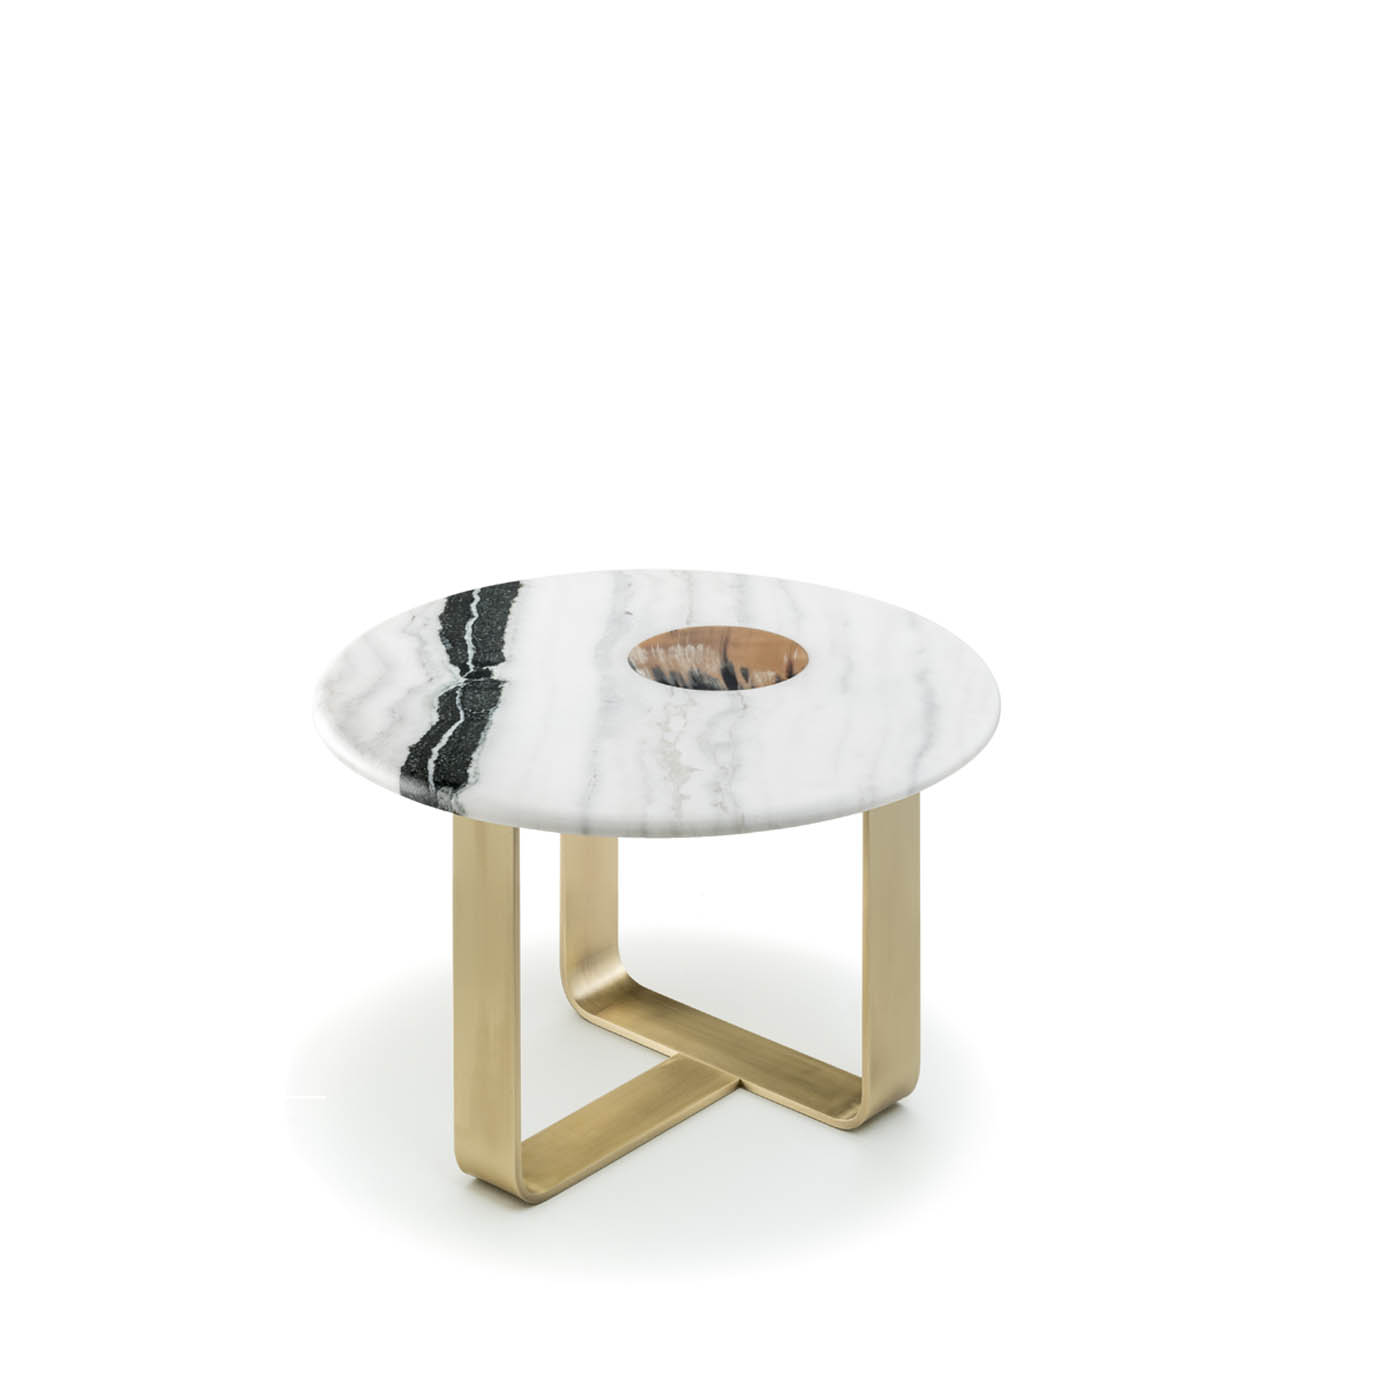 Tables and console tables - Apollo side table in Dalmata marble and satin brass - Arcahorn